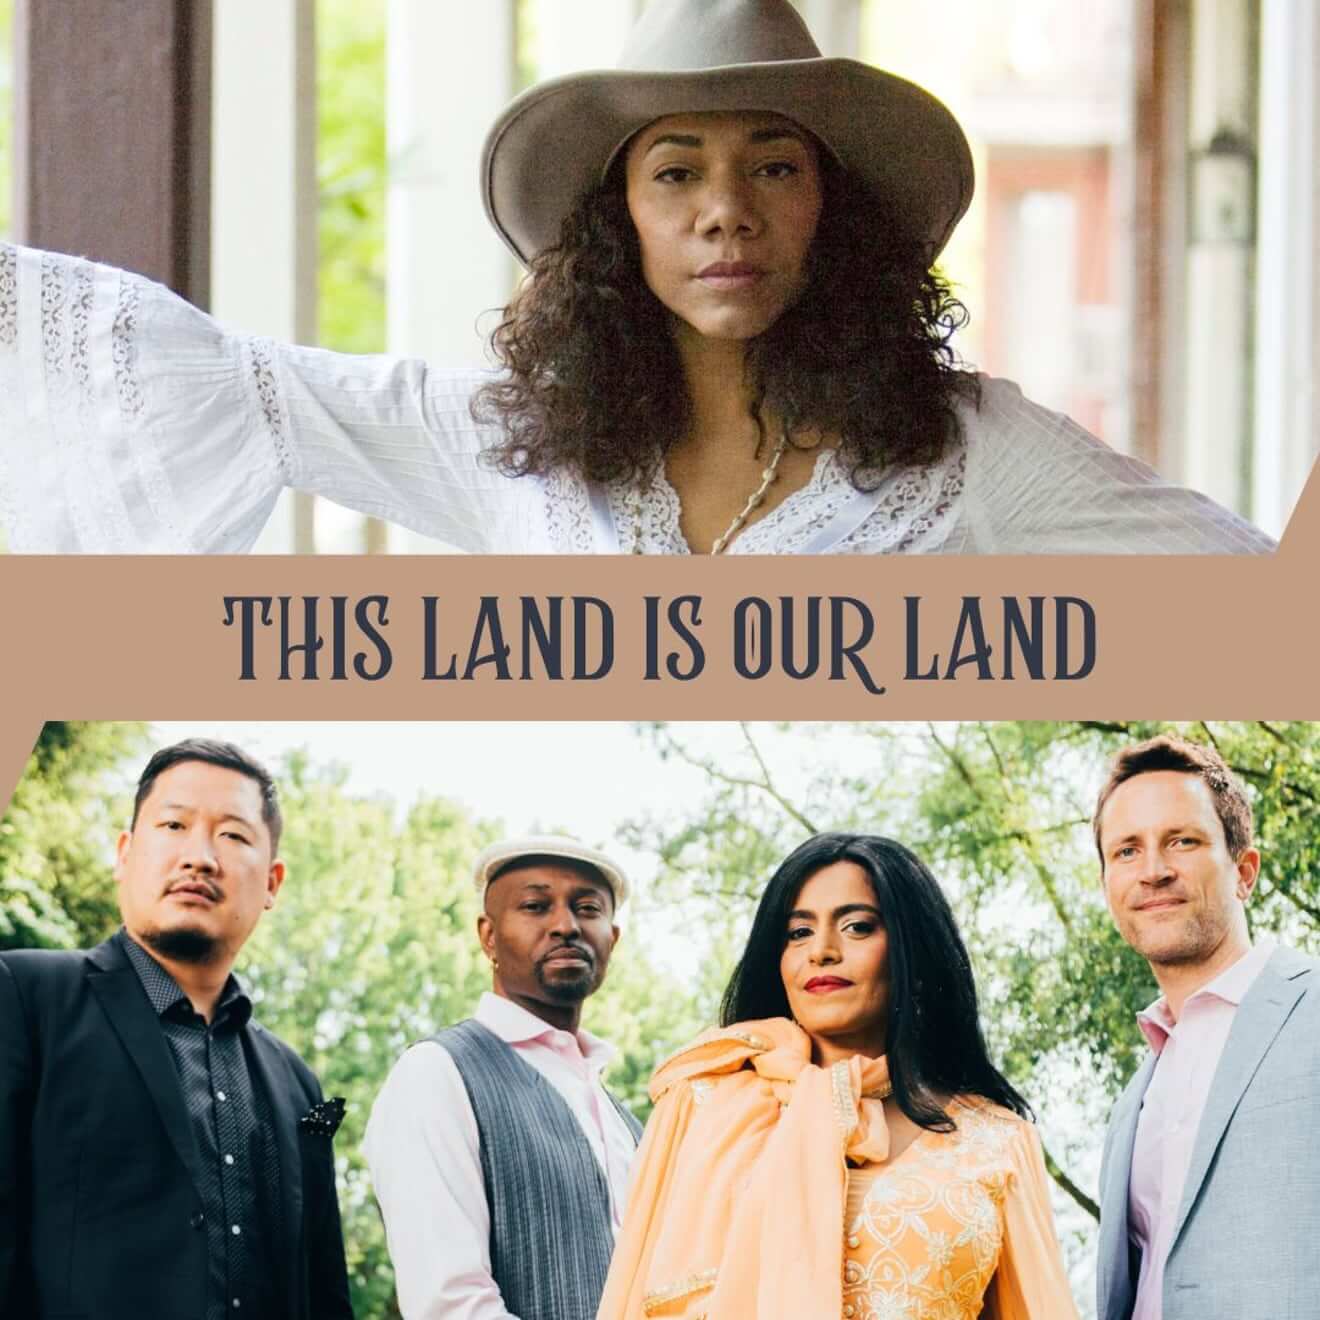 An African American, Indigenous woman with long dark hair, a white cowboy hat and a white blouse is on top of a title that reads “This Land is Our Land,” and on the bottom of the title there is a quartet. On the left is a Japanese man with short hair and facial hair wearing a dark suit, then there is Black man with a light shirt and grey vest with a white cap. Next there is an Indian American woman in a yellow dress with long, black hair, and finally on the right is a Caucasian man with short hair and a gray blazer.